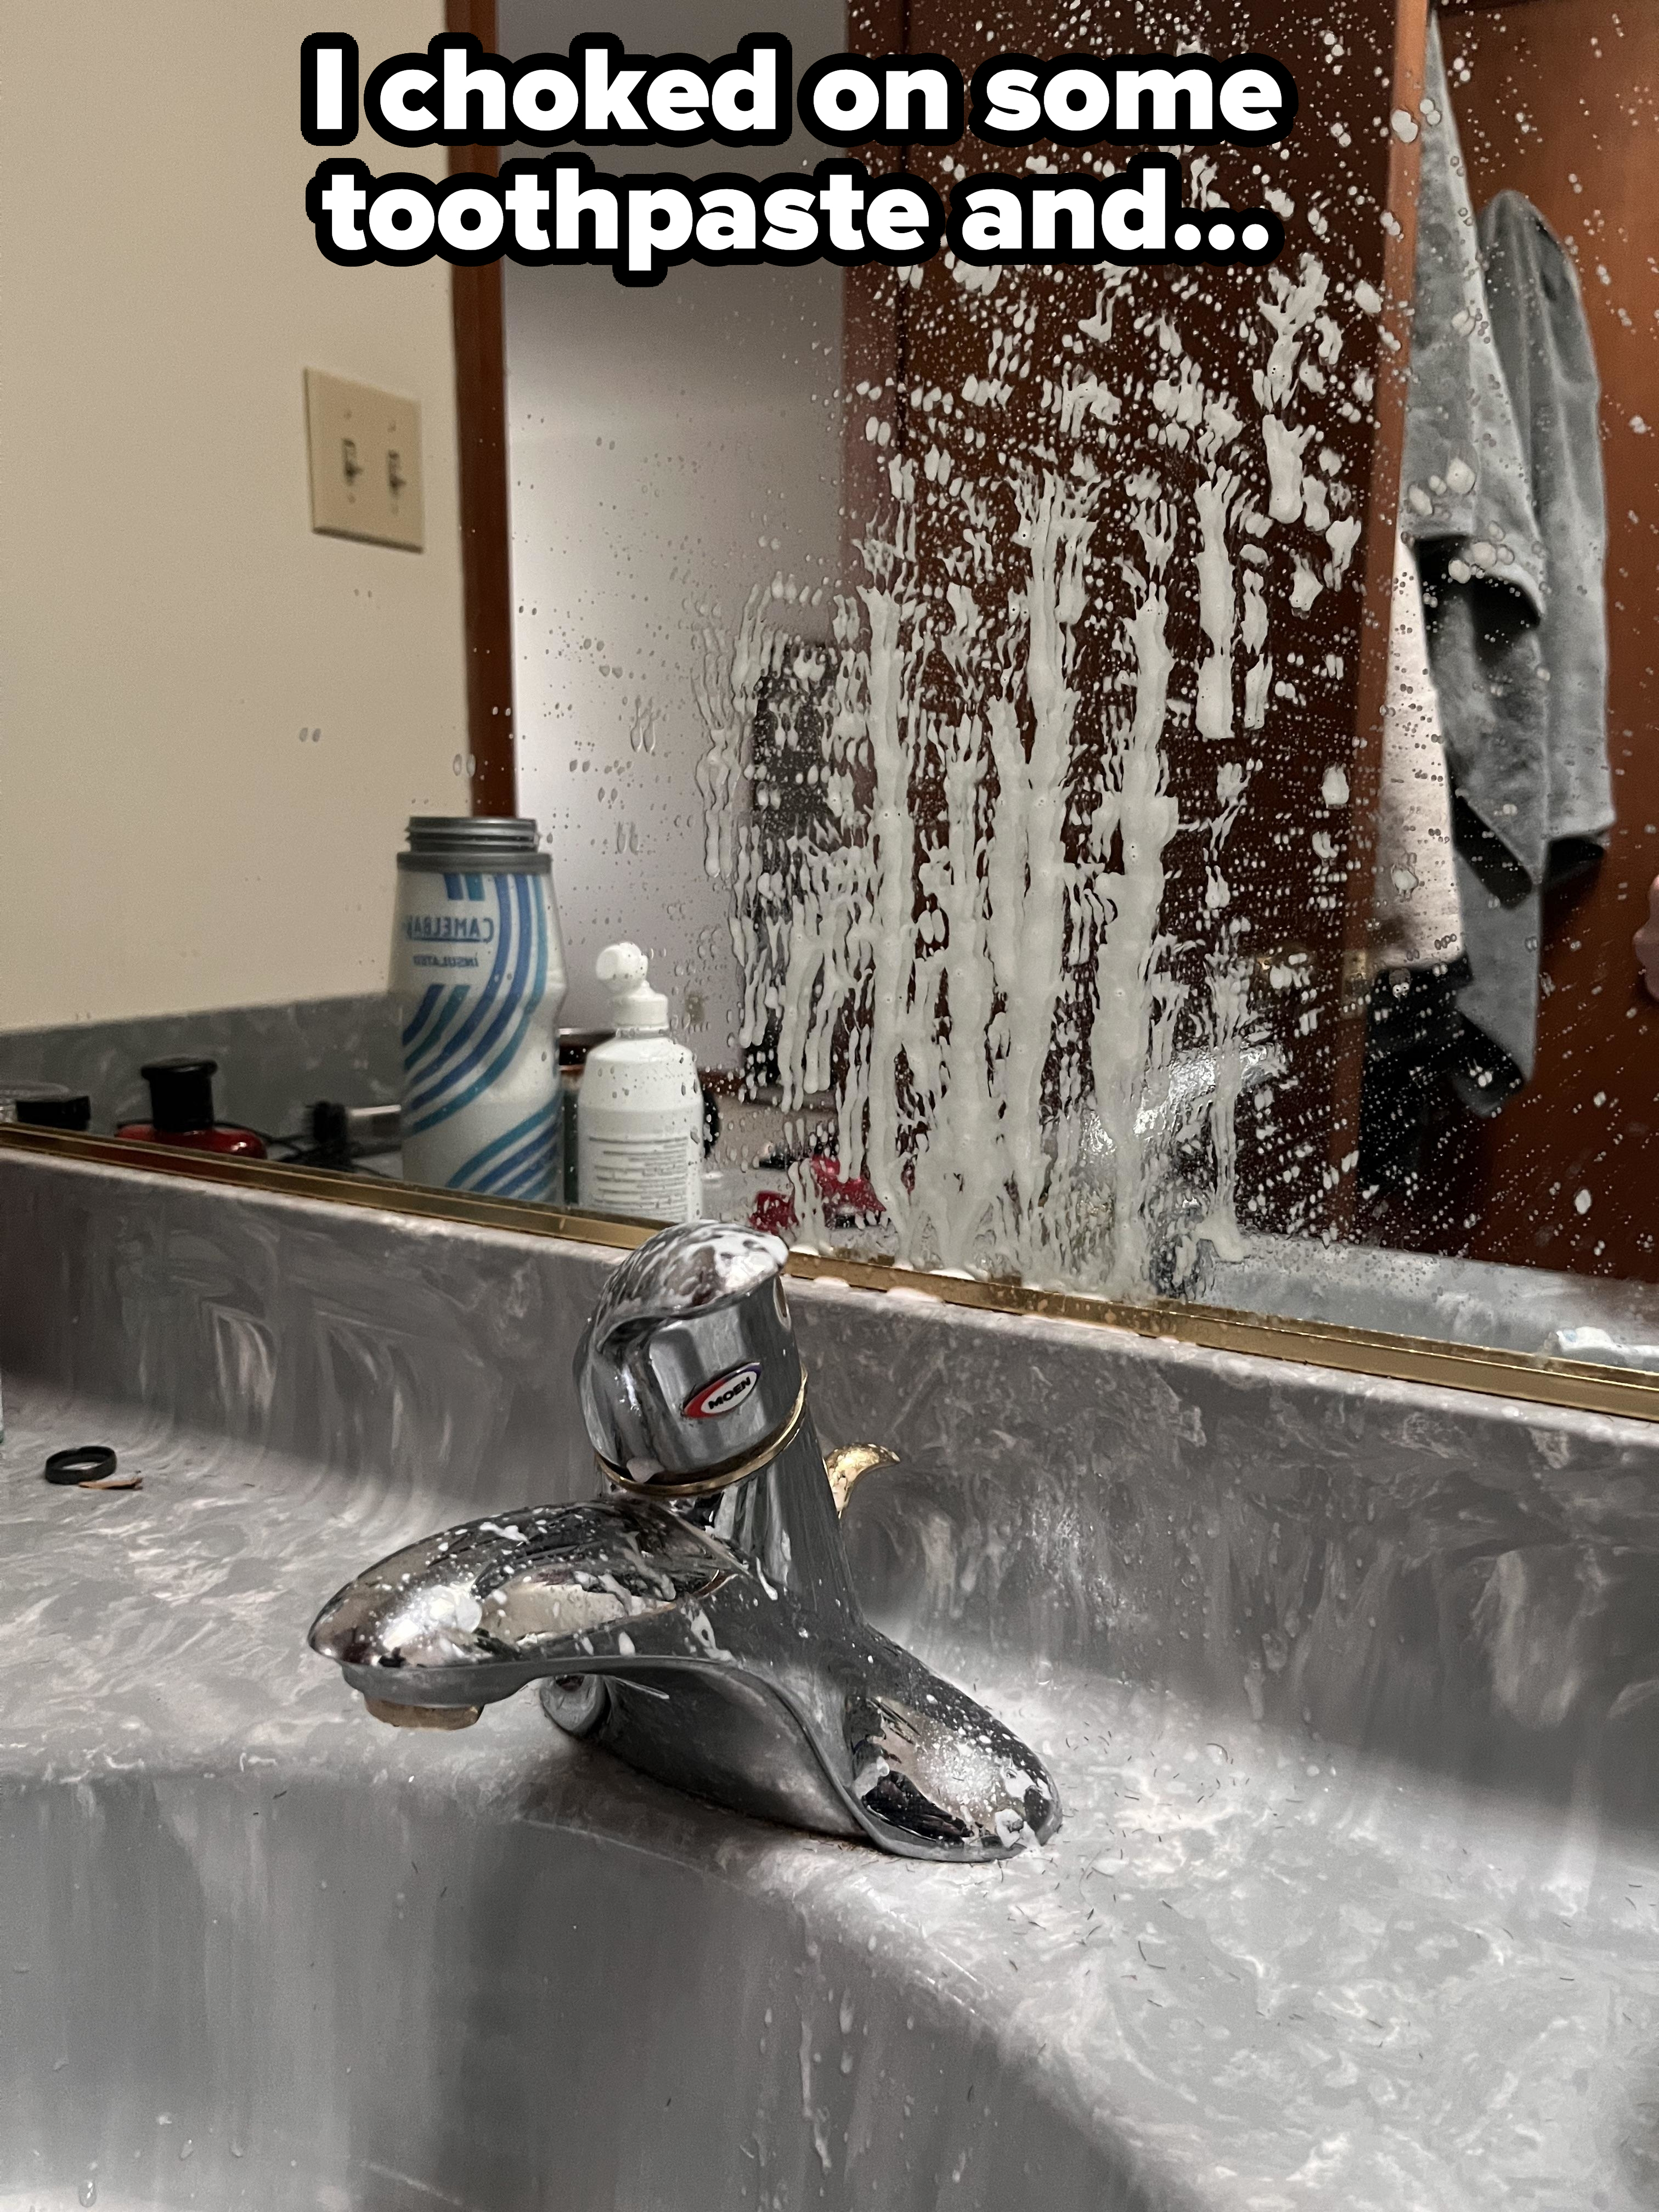 &quot;I choked on some toothpaste,&quot; with the bathroom window and sink covered in a spray of debris